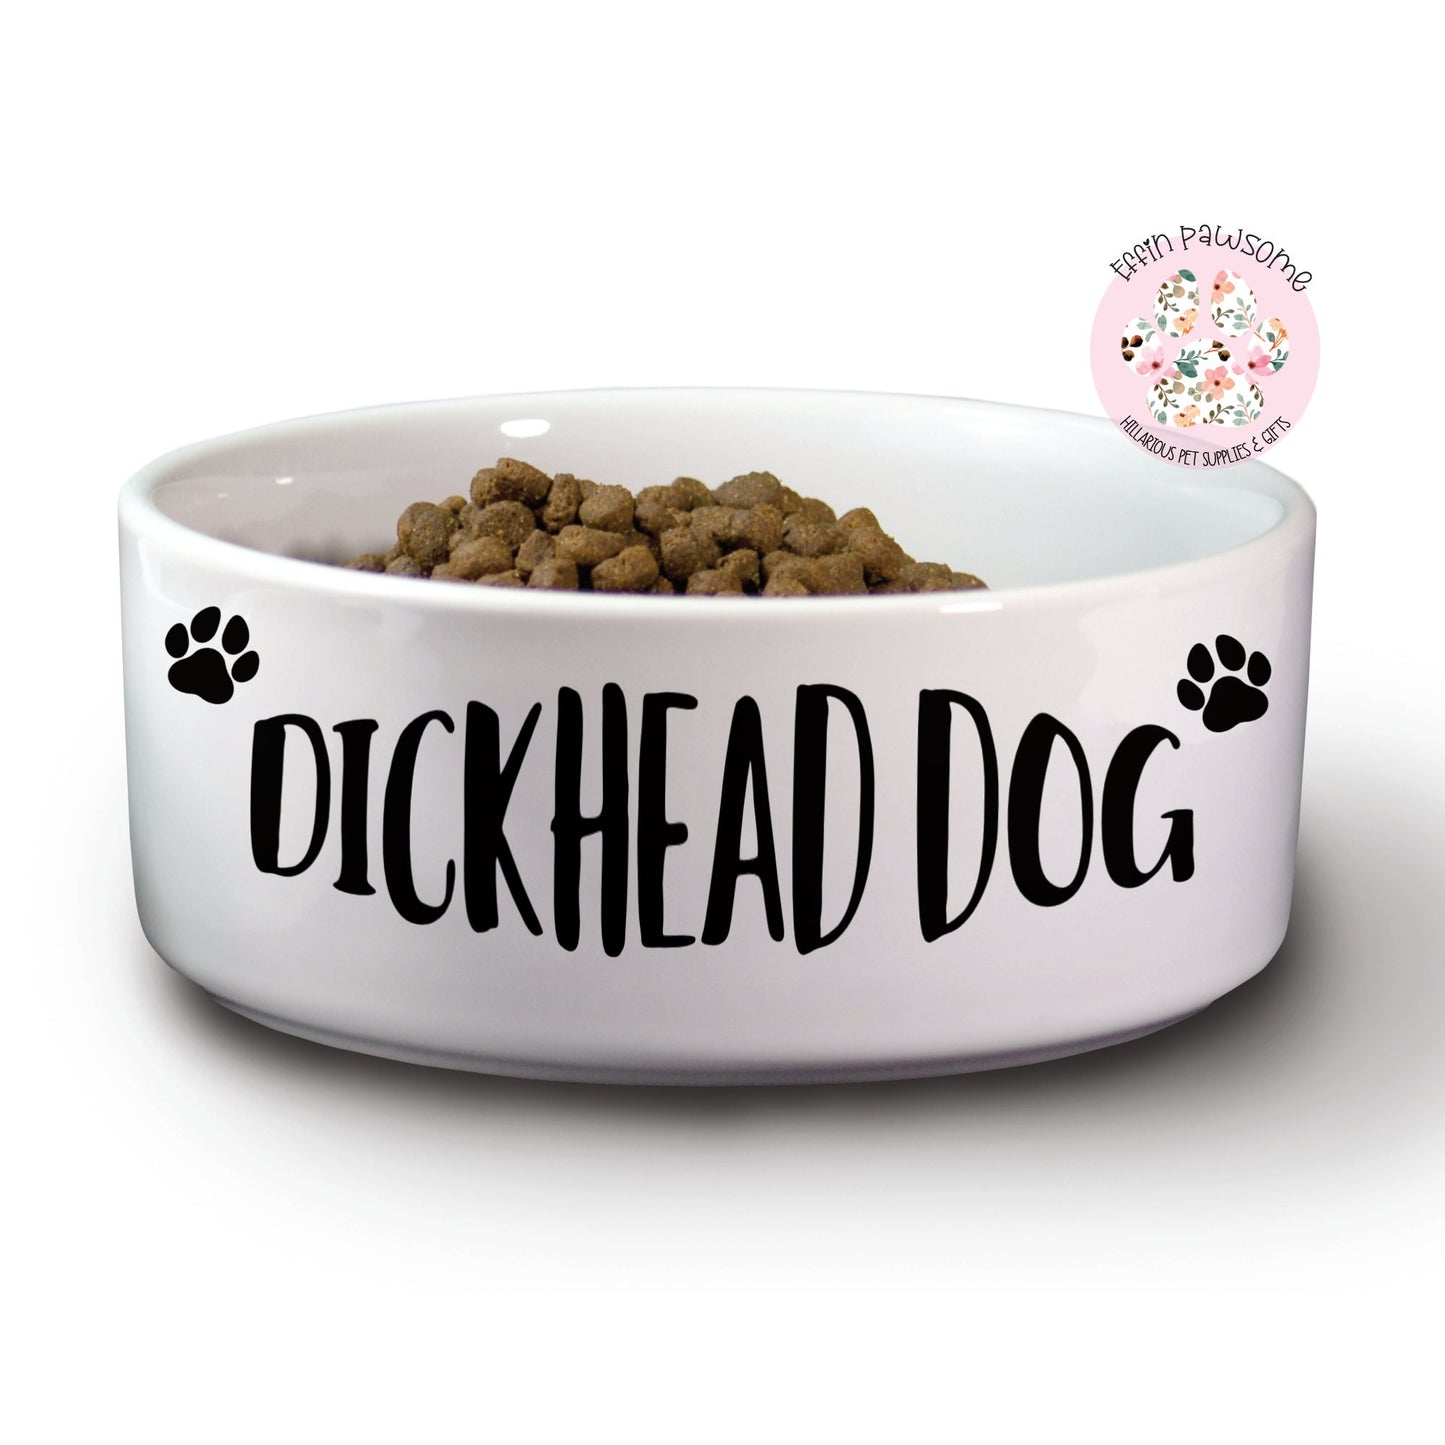 Dickhead Dog | Ceramic Pet Feeding Bowl | Pet Accessories | Feeding Supplies | Funny Dogs Gift | New Home | Novelty Gift | New Pet Gift